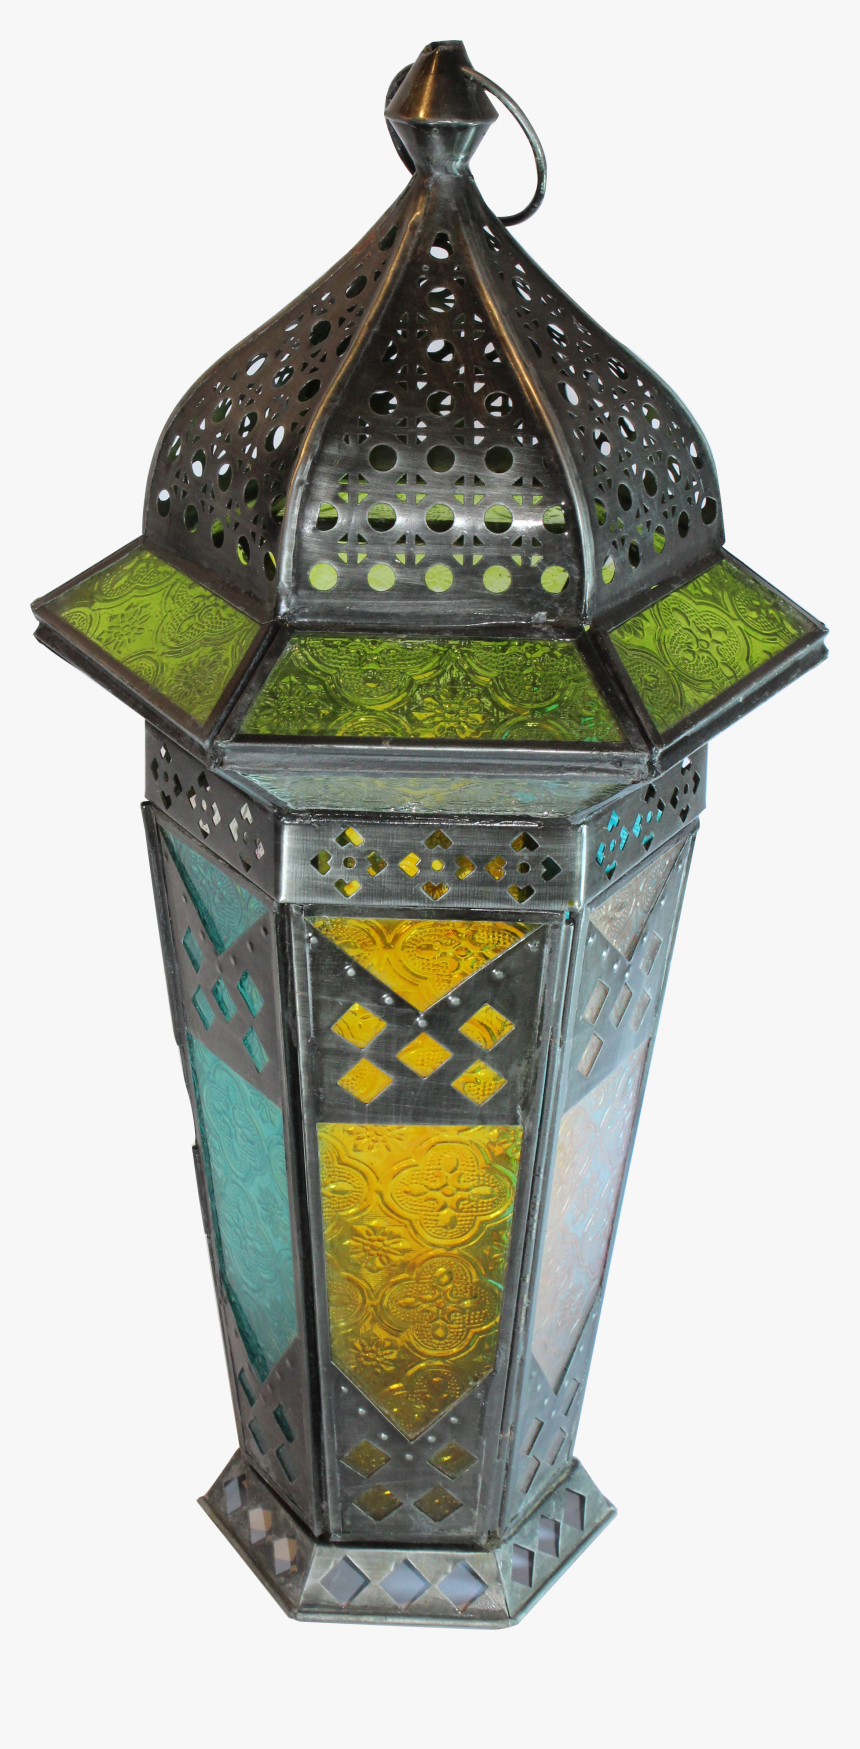 The Home Hanging Lantern Hexagonal D087, HD Png Download, Free Download